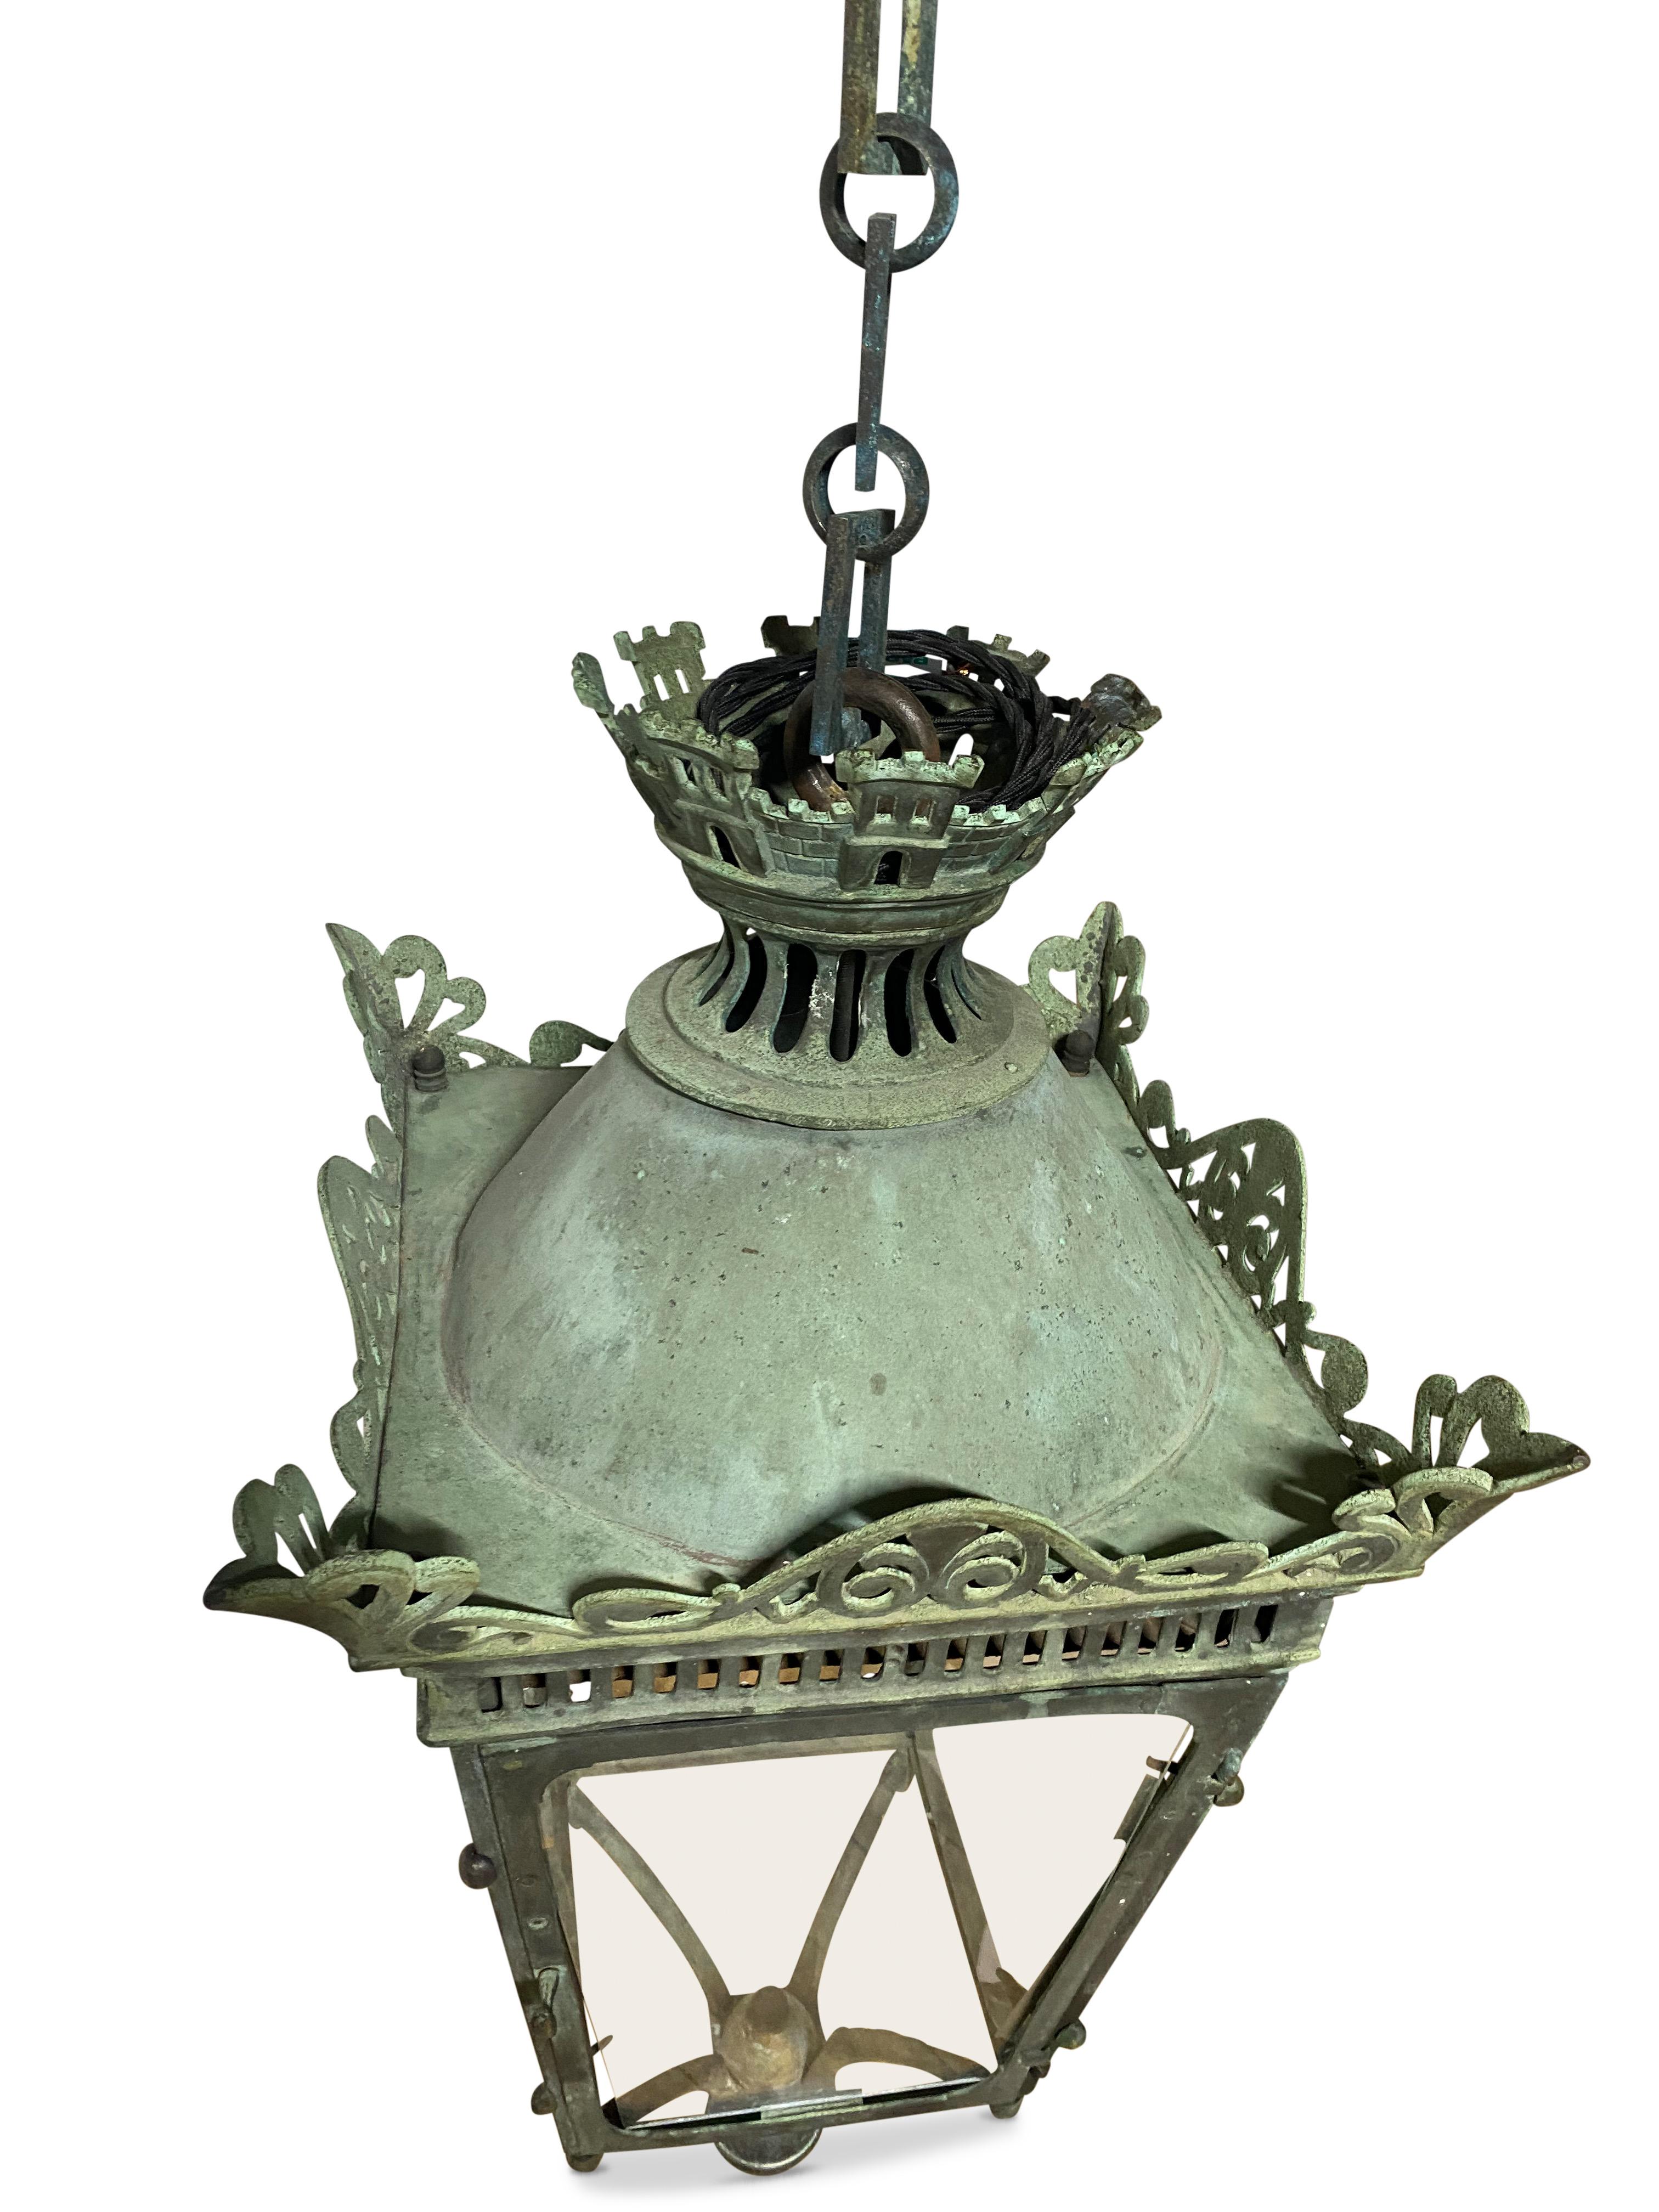 Fantastic rare Late 19th Century French verdigris copper hanging lantern with chain.
This is a fabulous fully glazed verdigris copper lantern featuring beautiful-pierced frame with turret top with a hexagonal link chain that compliments the